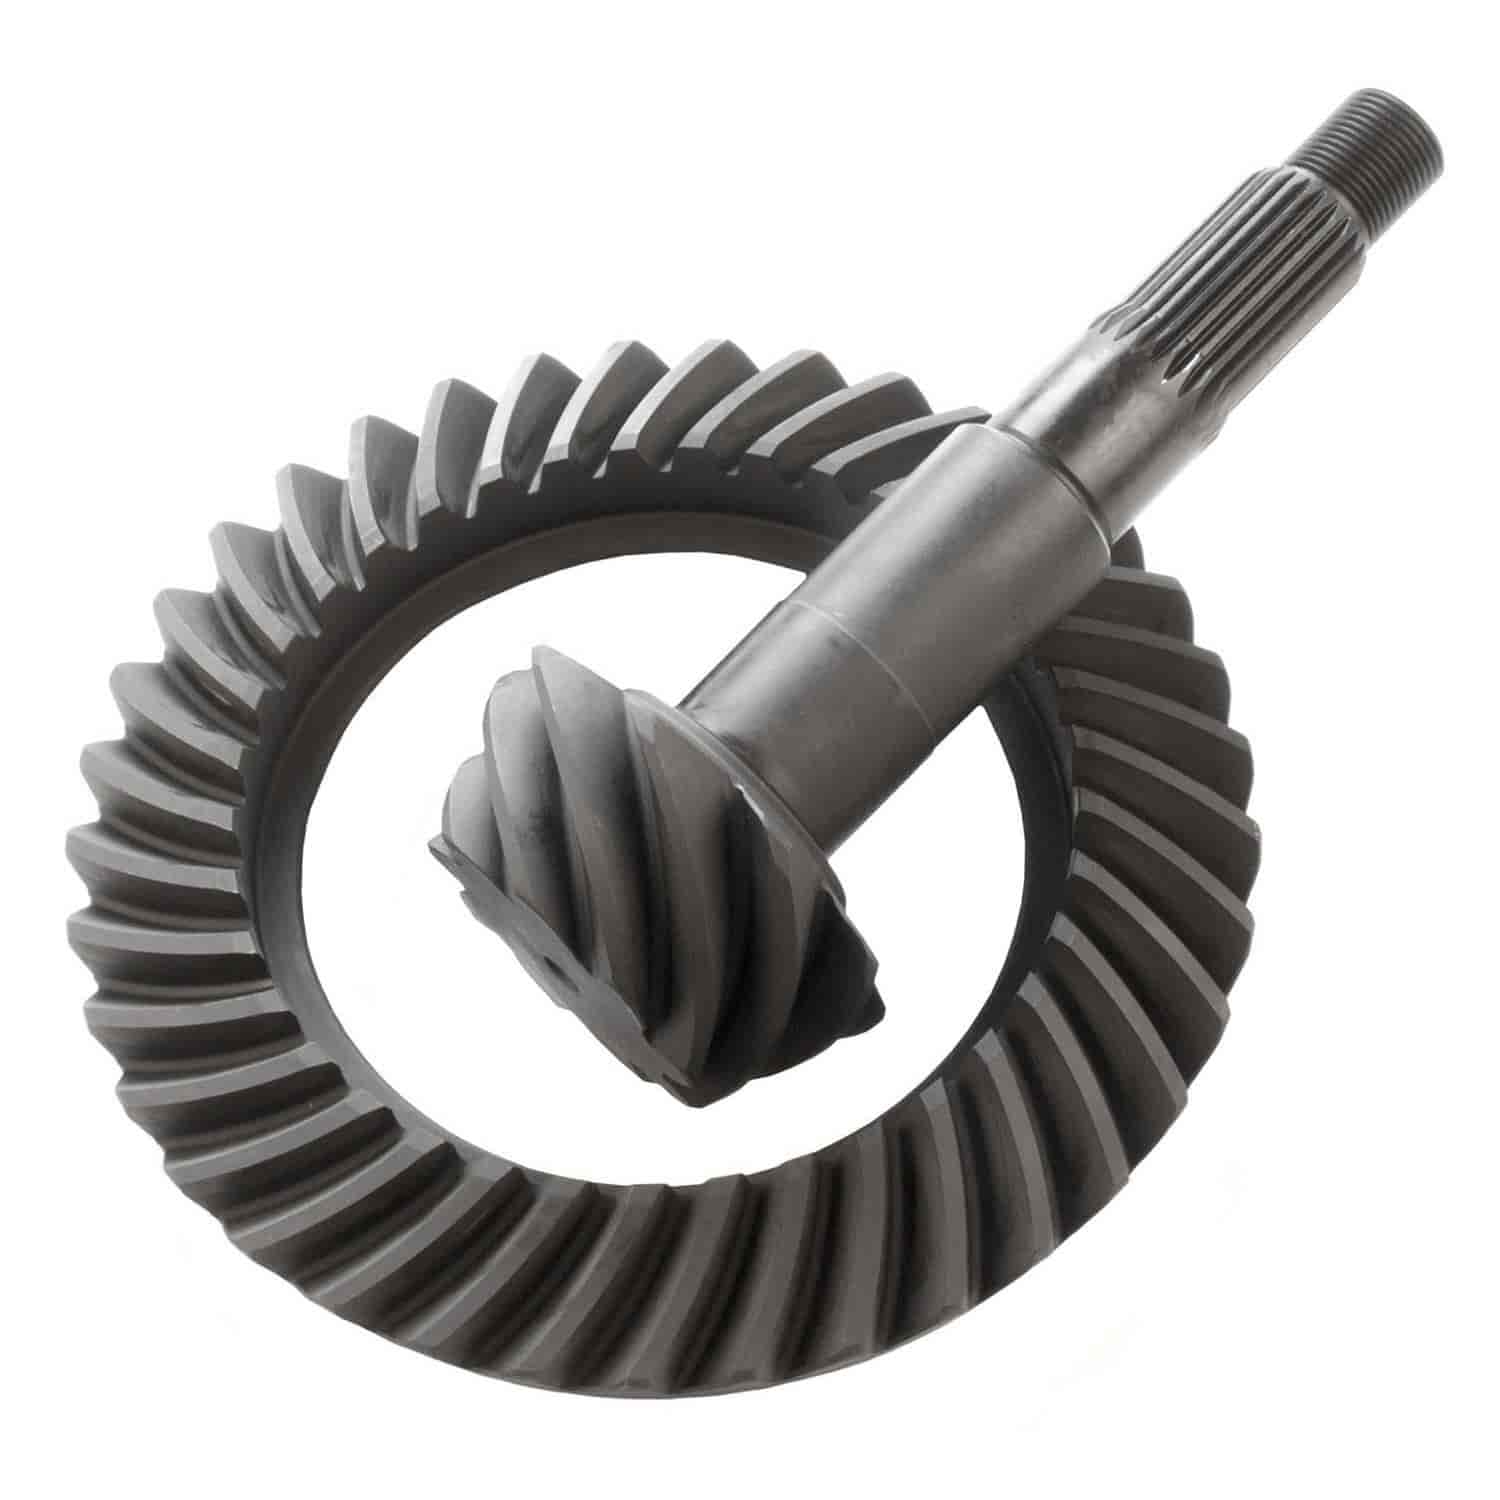 SVL 10004608 Differential Ring and Pinion Gear Set for GM 8.2 3.36 Ratio 